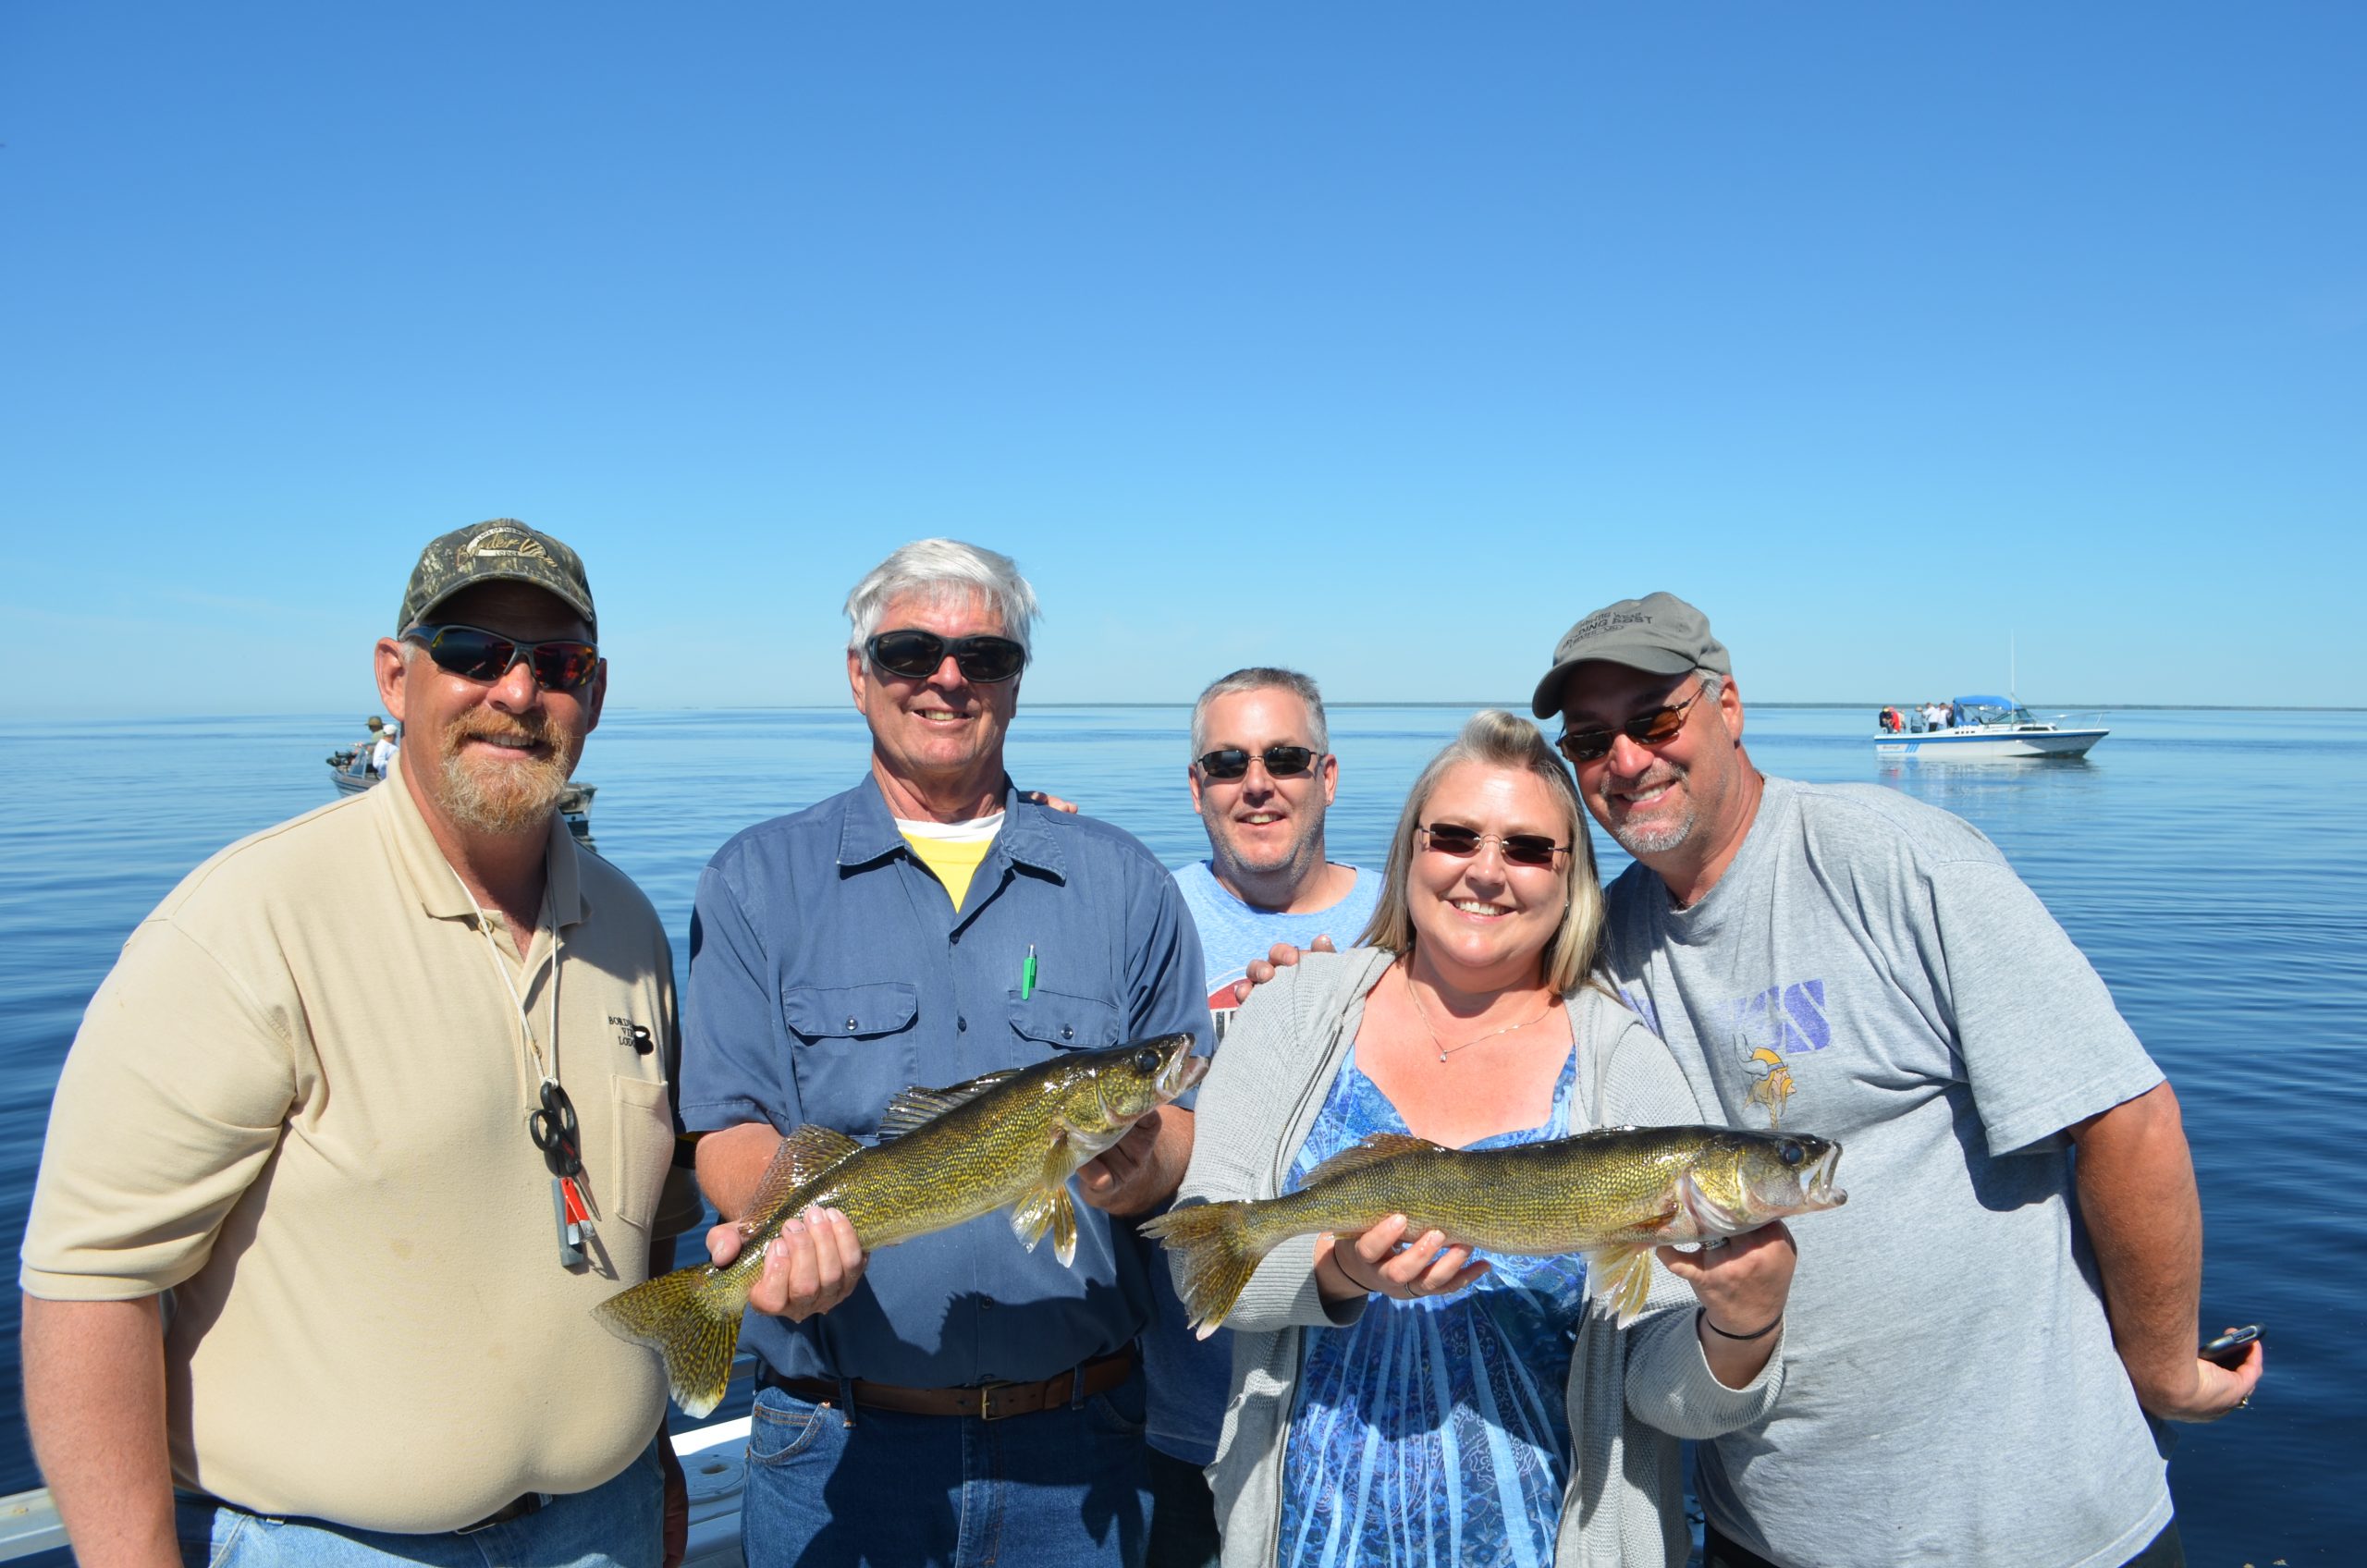 A special day fishing on a charter boat on Lake of the Woods